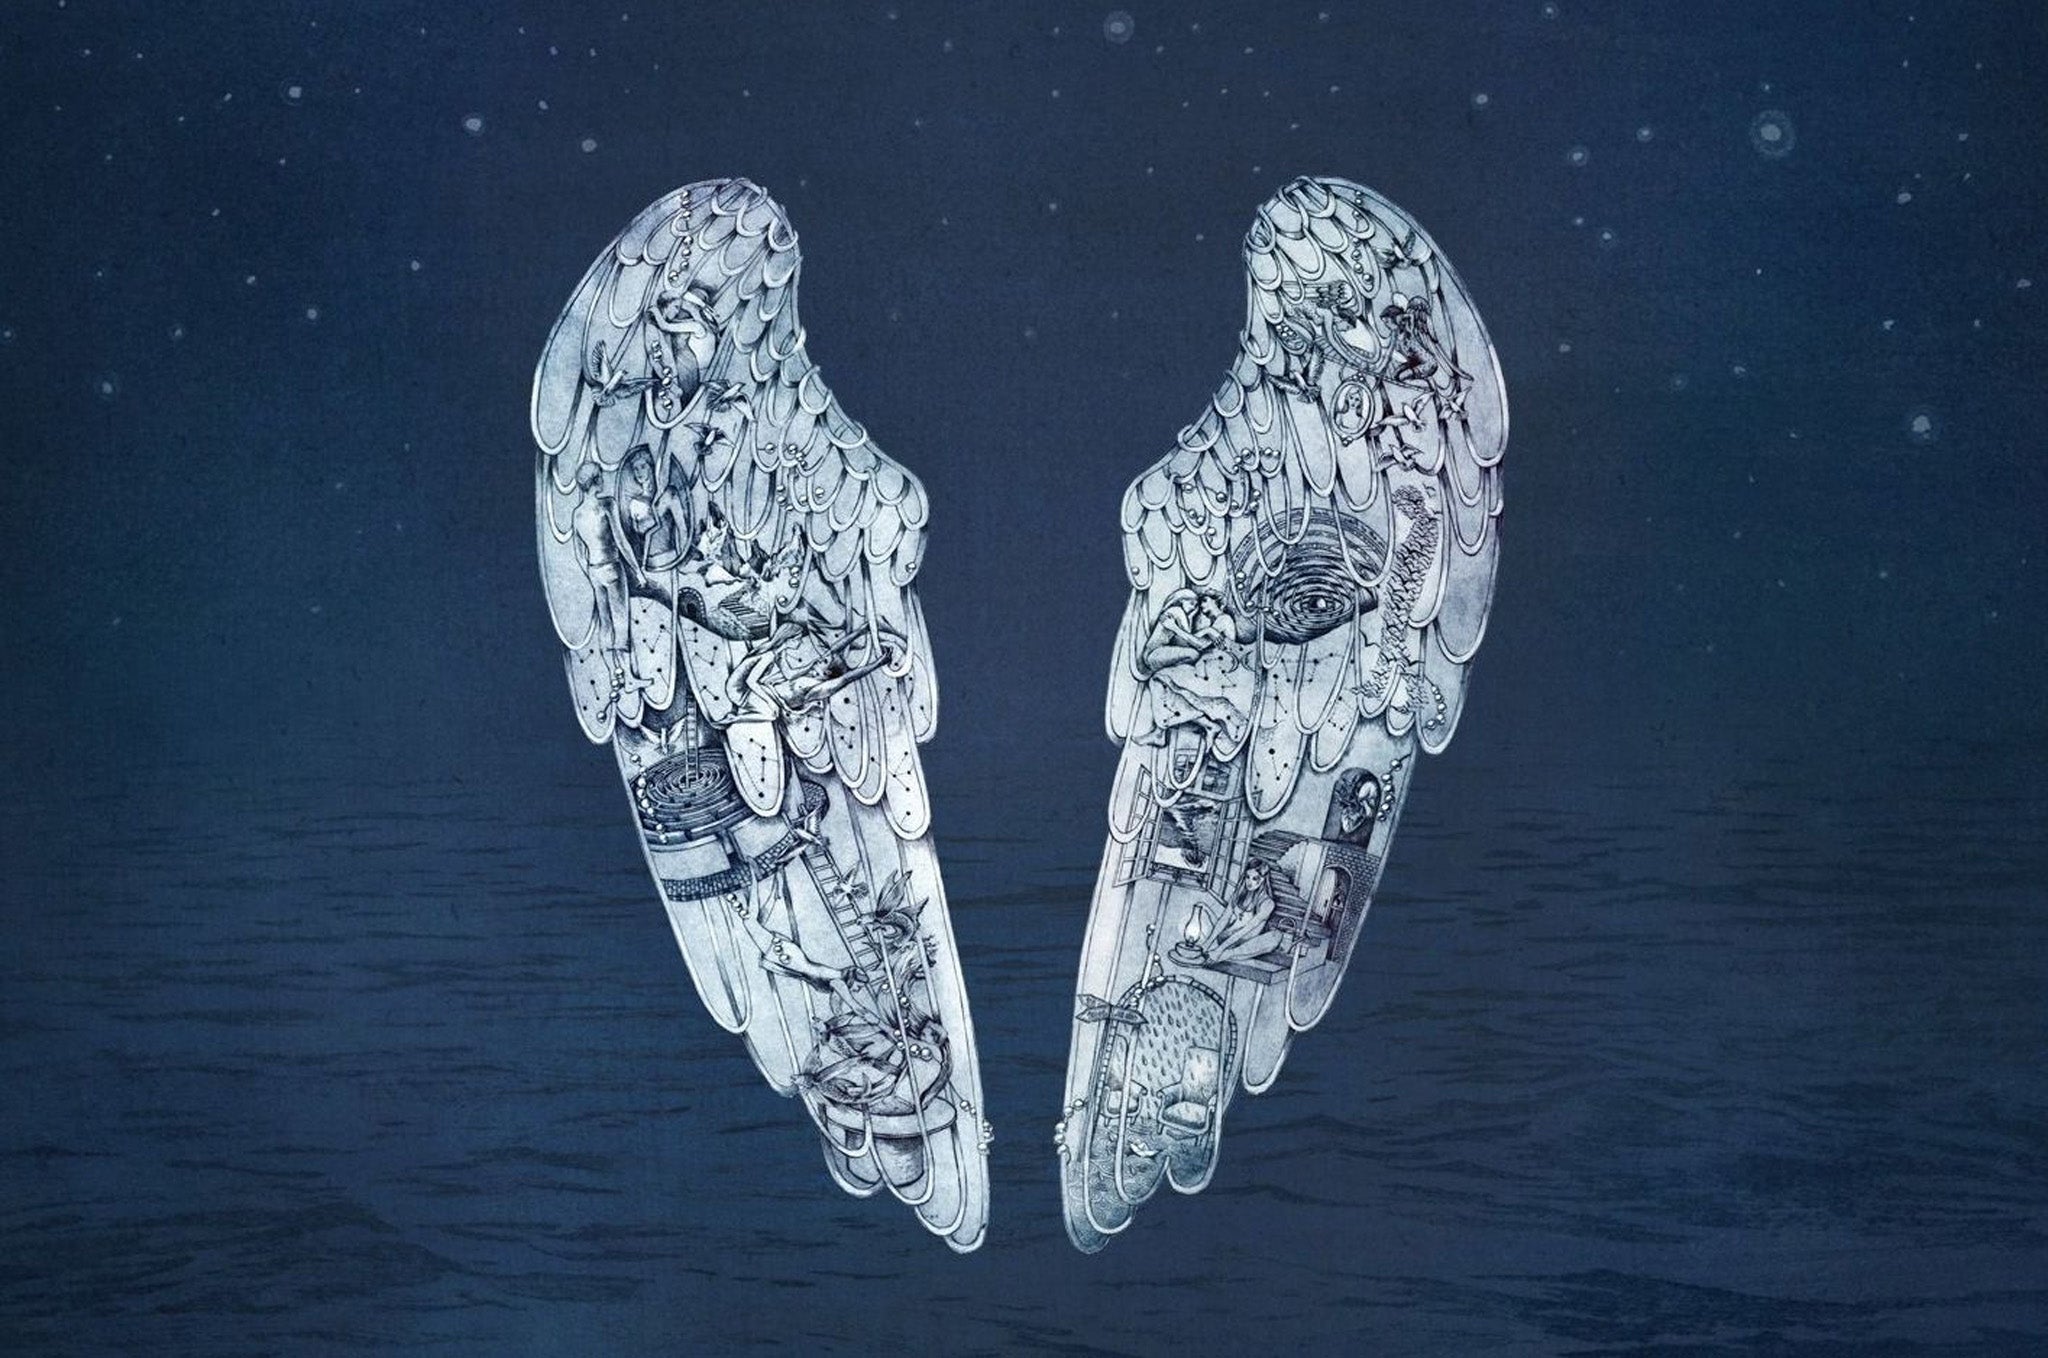 Coldplay's Ghost stories lacks the emotional grittiness of a break-up album